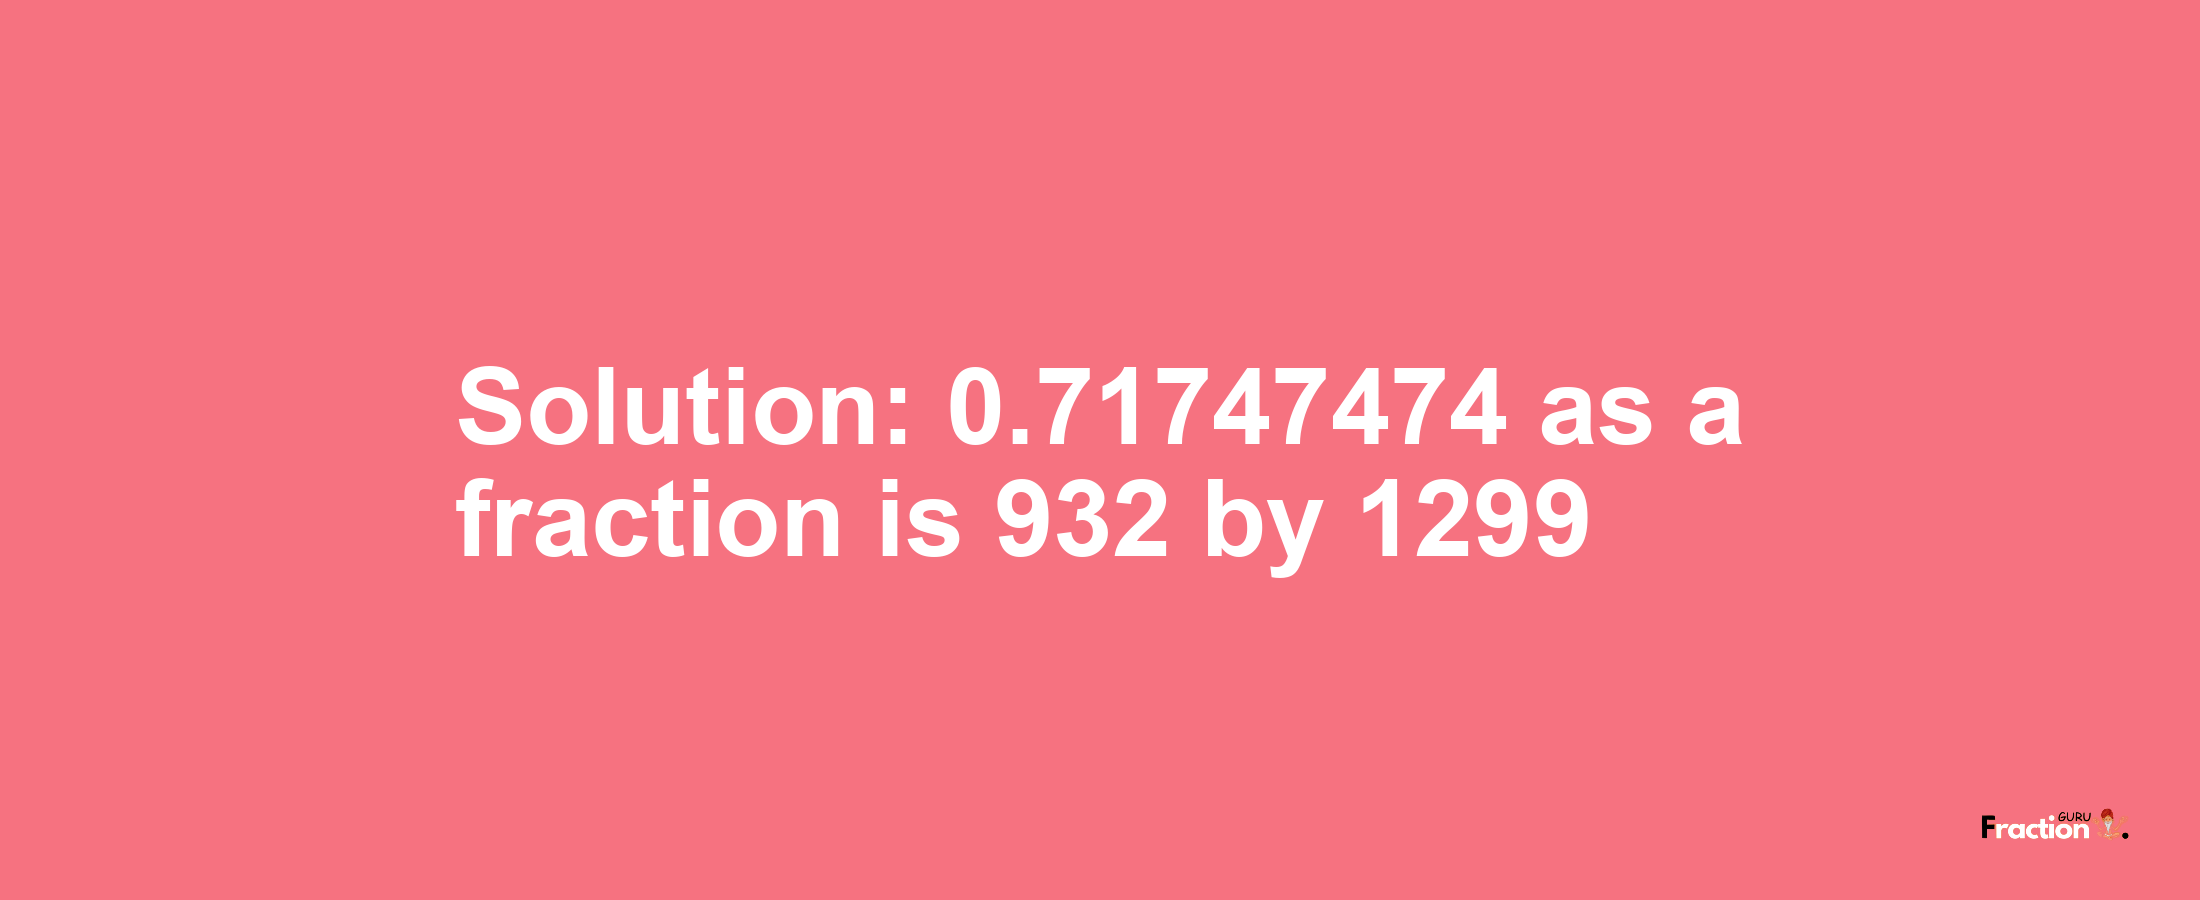 Solution:0.71747474 as a fraction is 932/1299